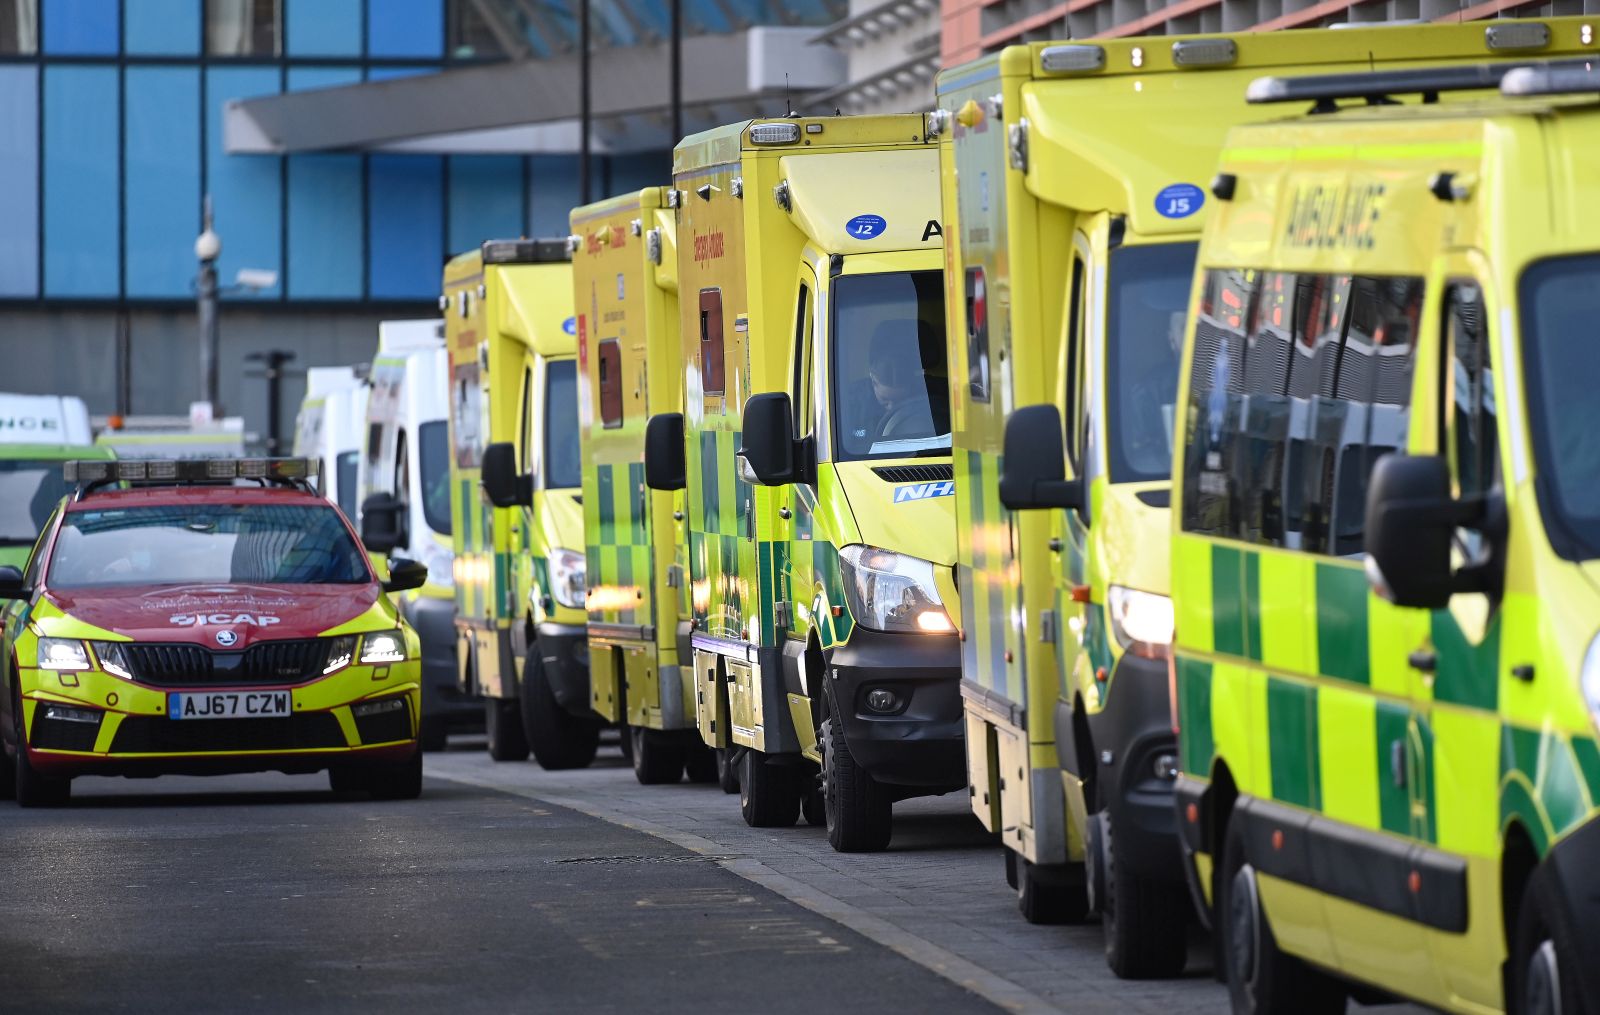 epa08924893 Ambulances line up outside the Royal London Hospital, in London, Britain, 07 January 2021. Britain's National Health Service (NHS) is coming under severe pressure as COVID-19 hospital admissions continue to rise across the United Kingdom. Some 1,000 people are dying each day from the disease.  EPA/ANDY RAIN